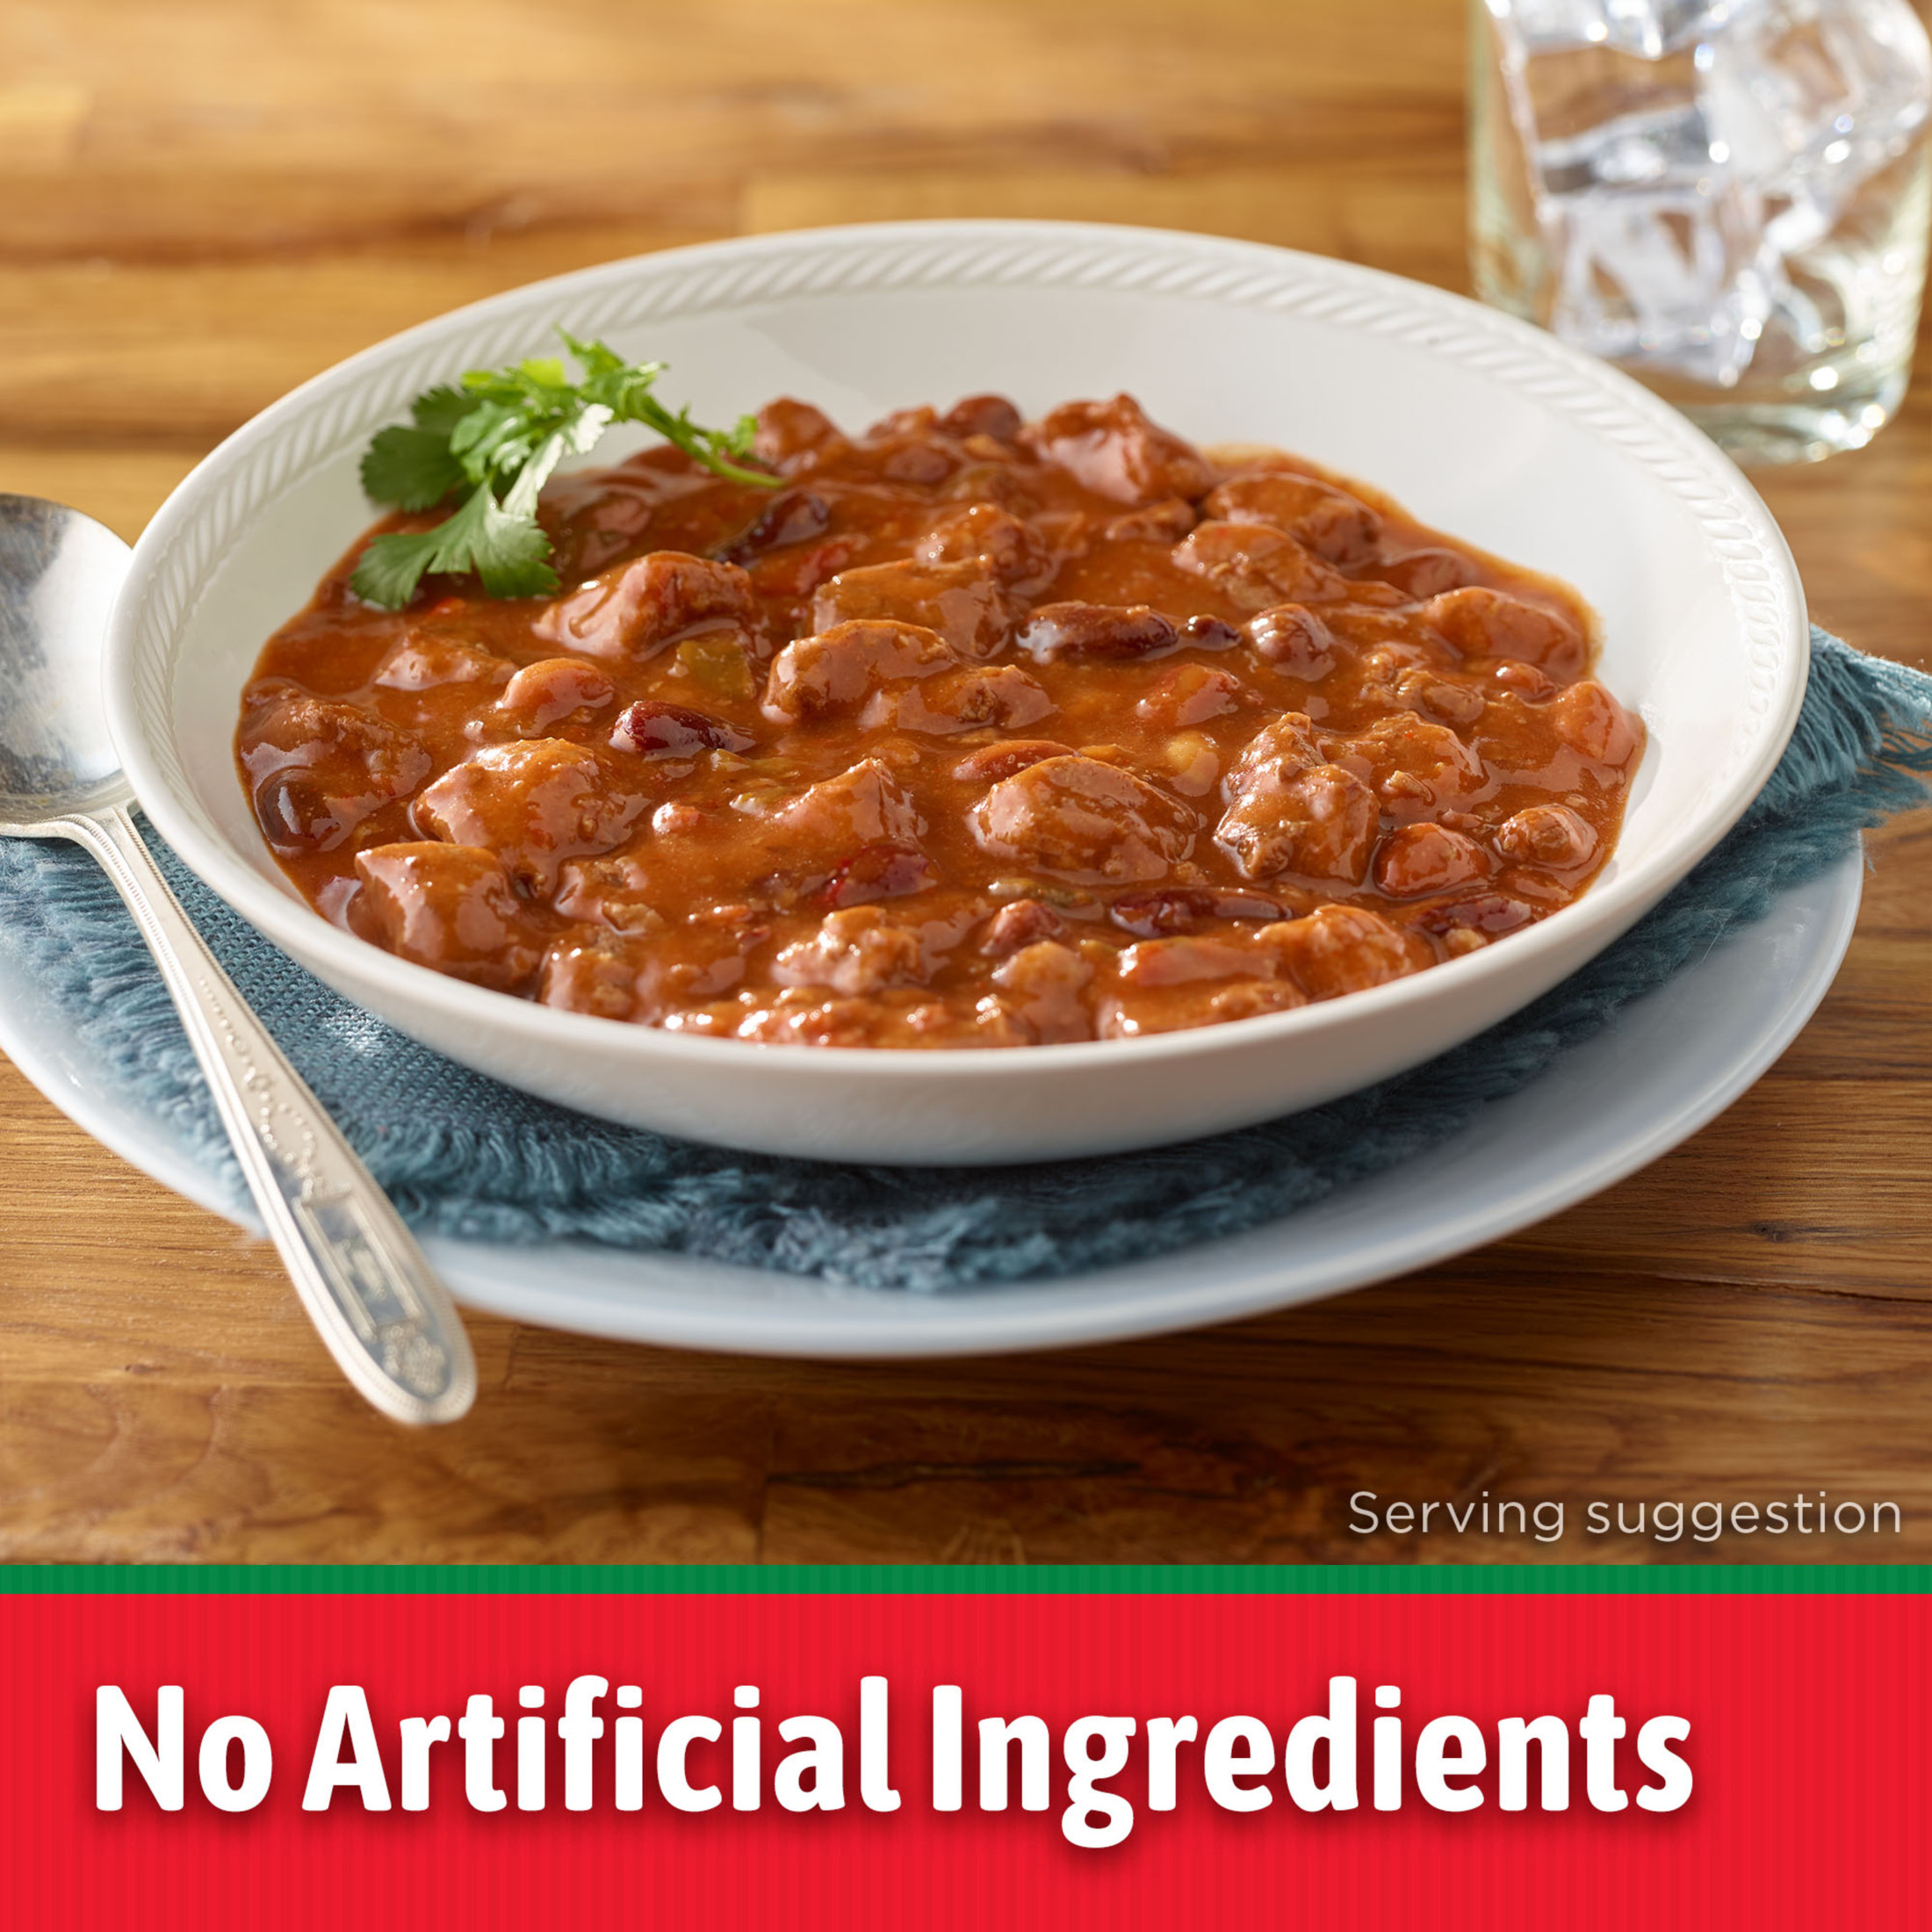 HORMEL COMPLEATS Chili w/Beans, No Artificial Ingredients, 10 oz Plastic Microwave Tray - image 4 of 12